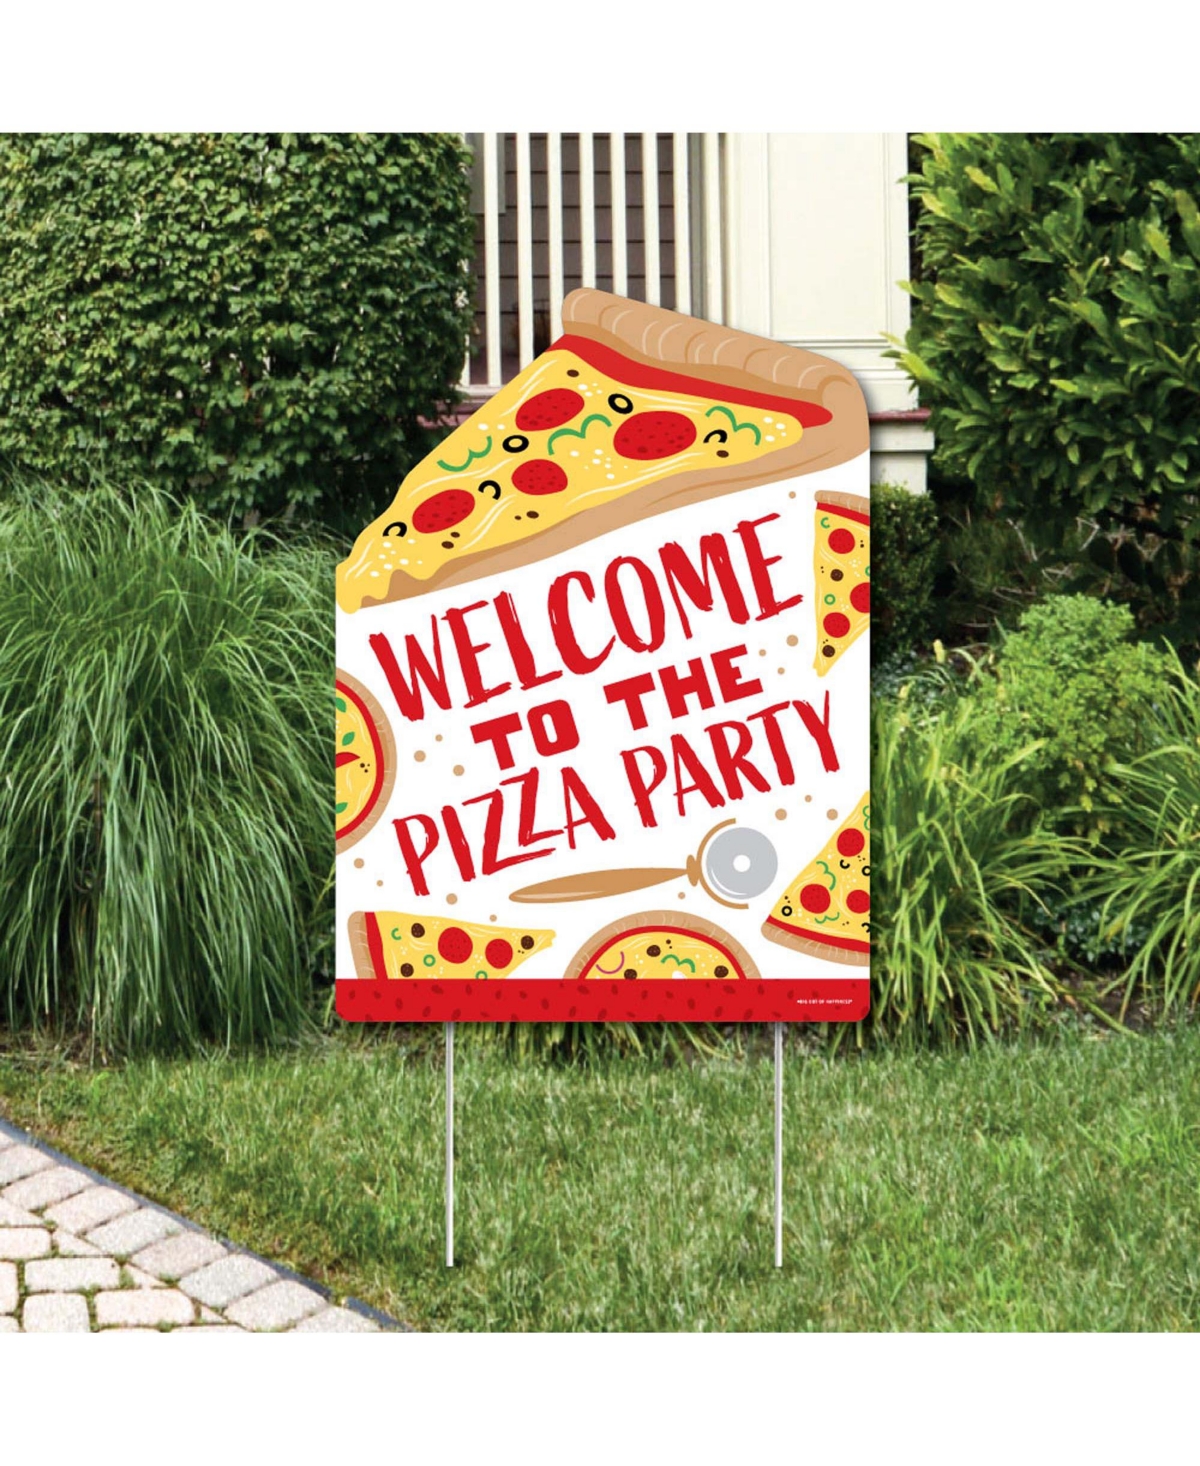 Pizza Party Time - Party Decorations - Party Welcome Yard Sign